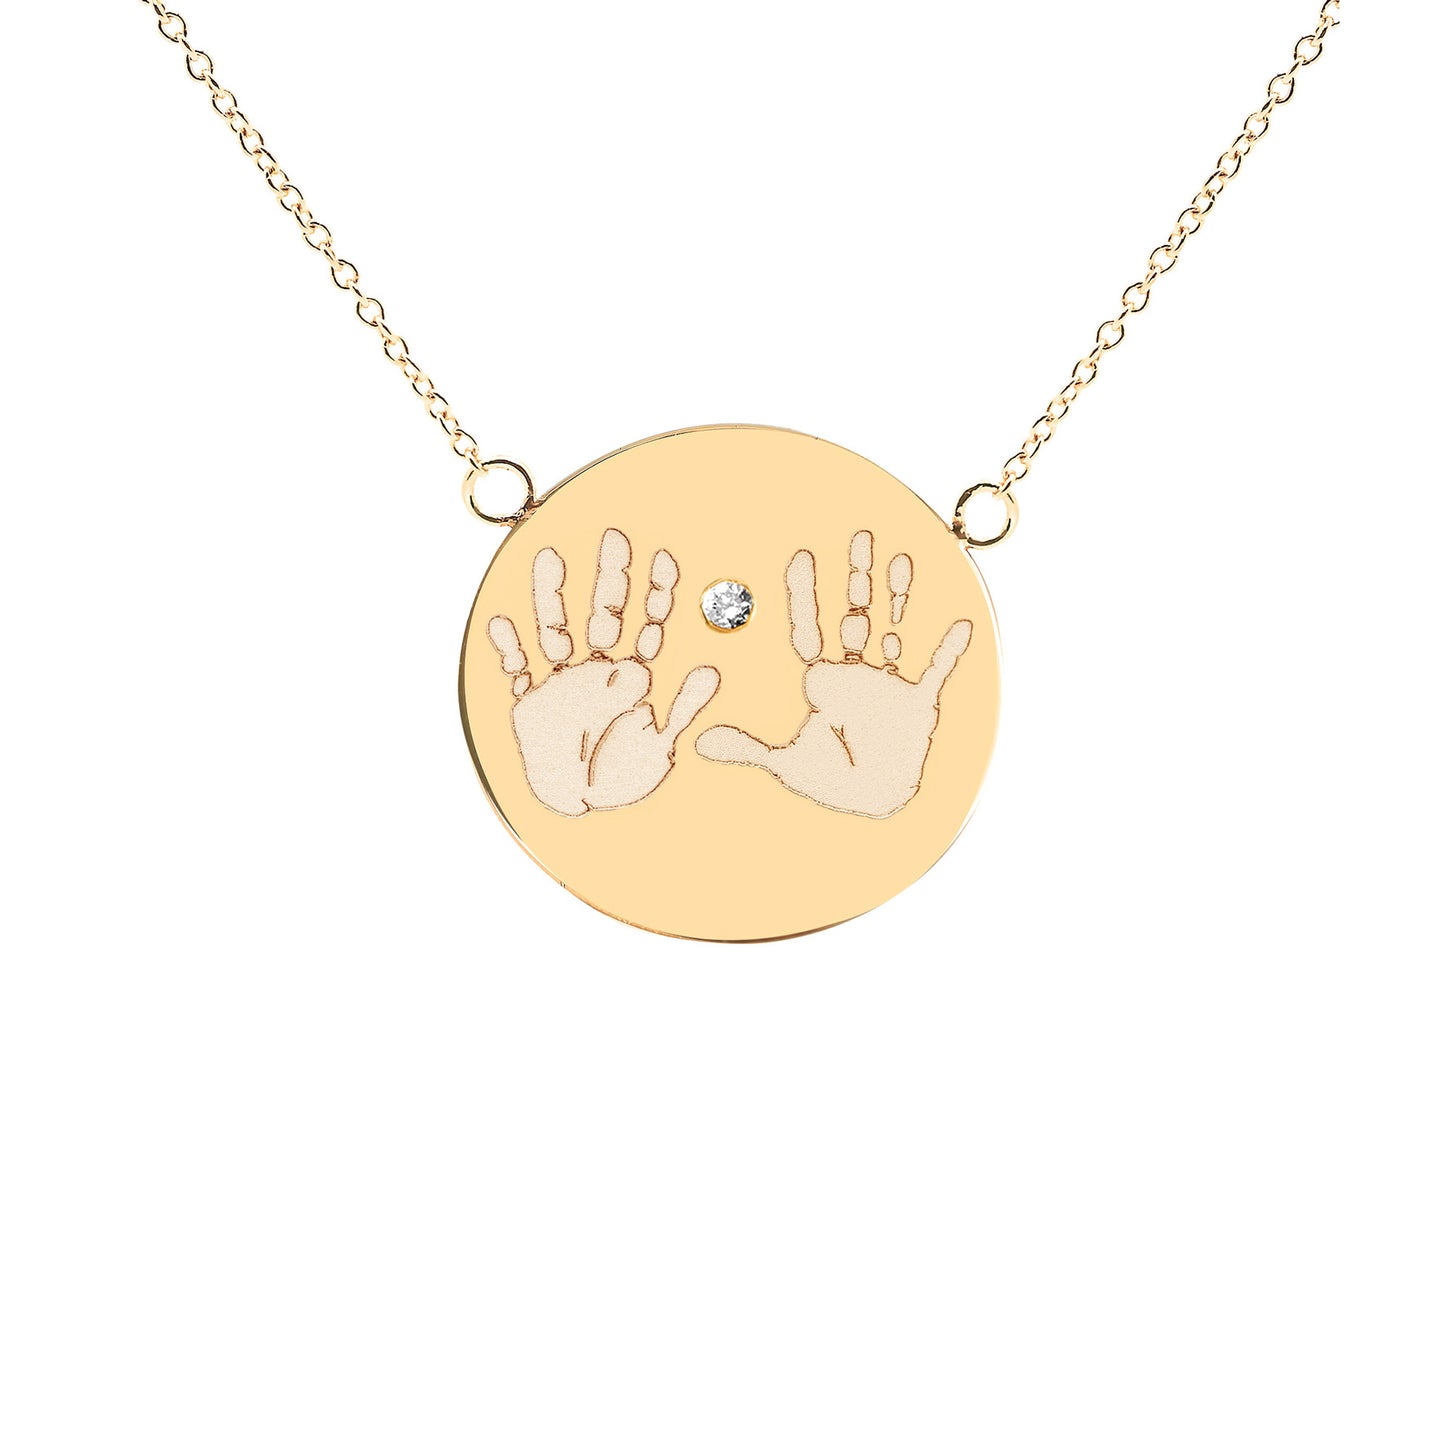 Large Round Handprints / Footprints Tag with a Diamond